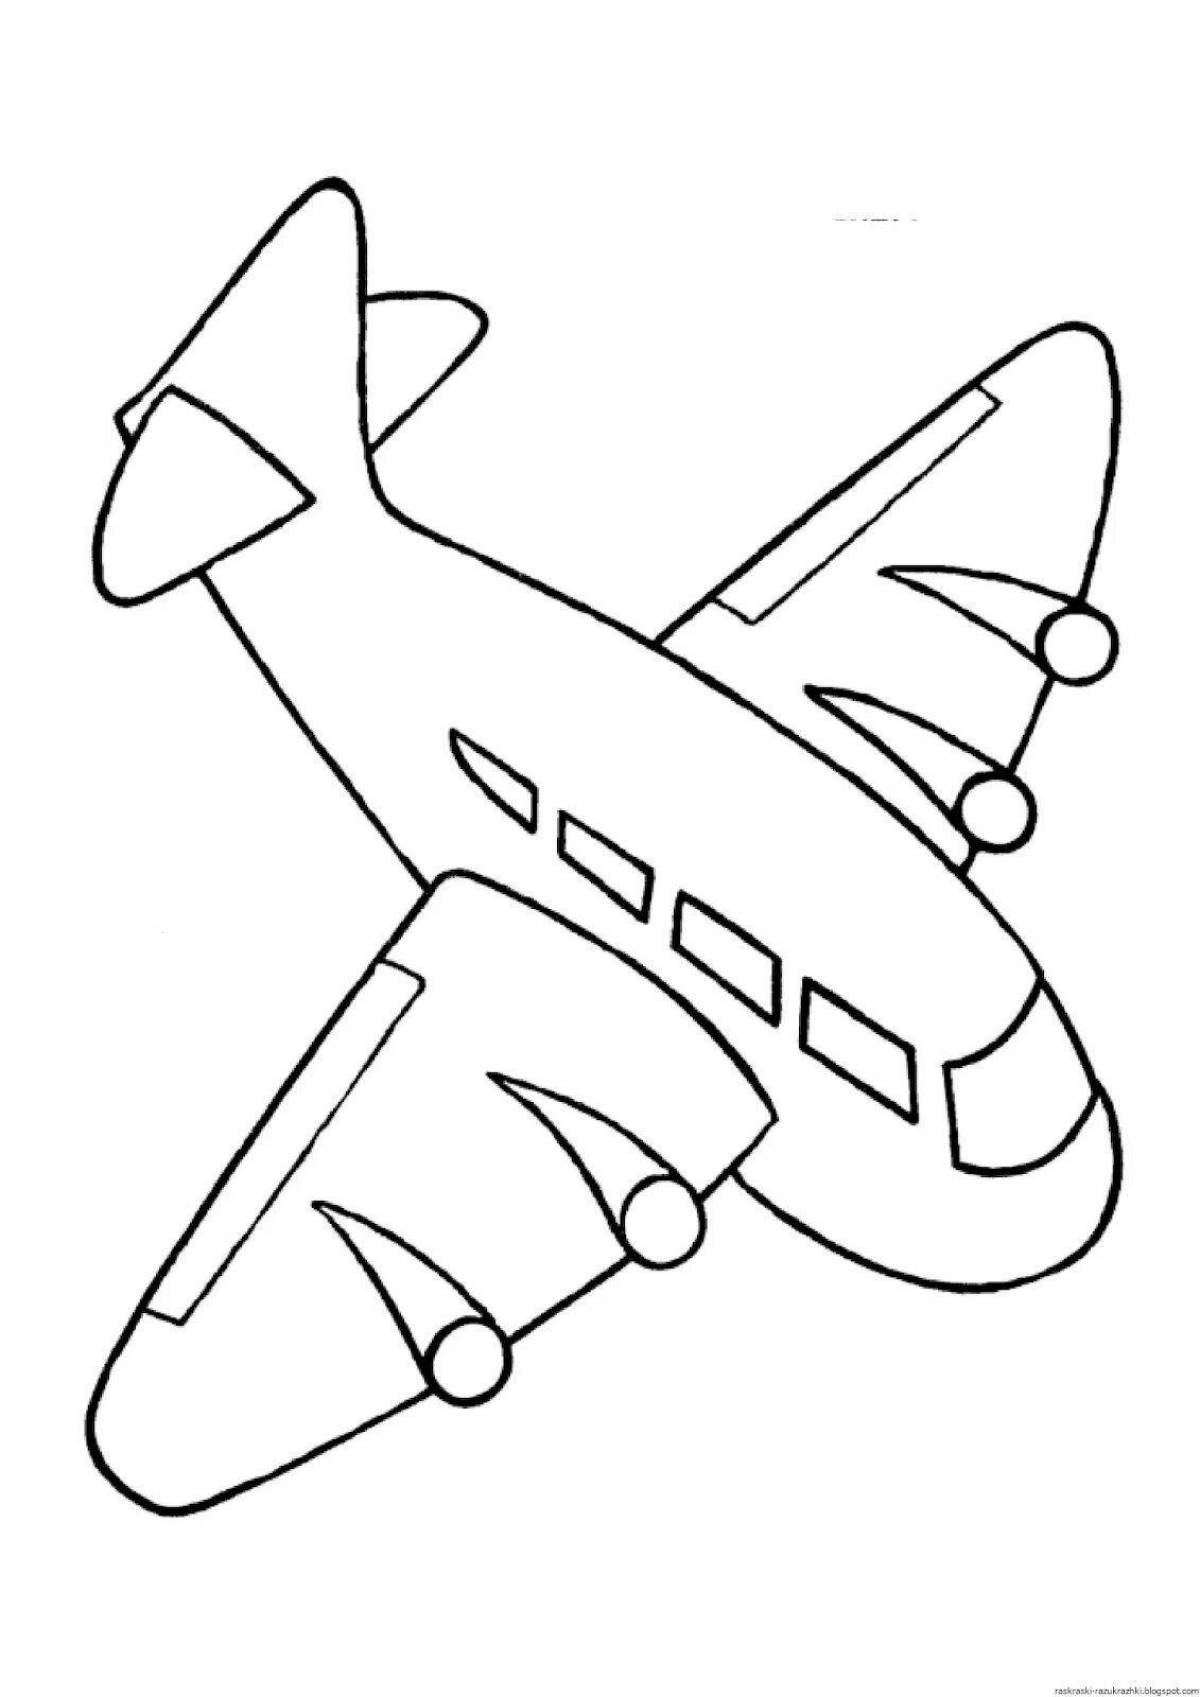 Amazing plane coloring book for kids